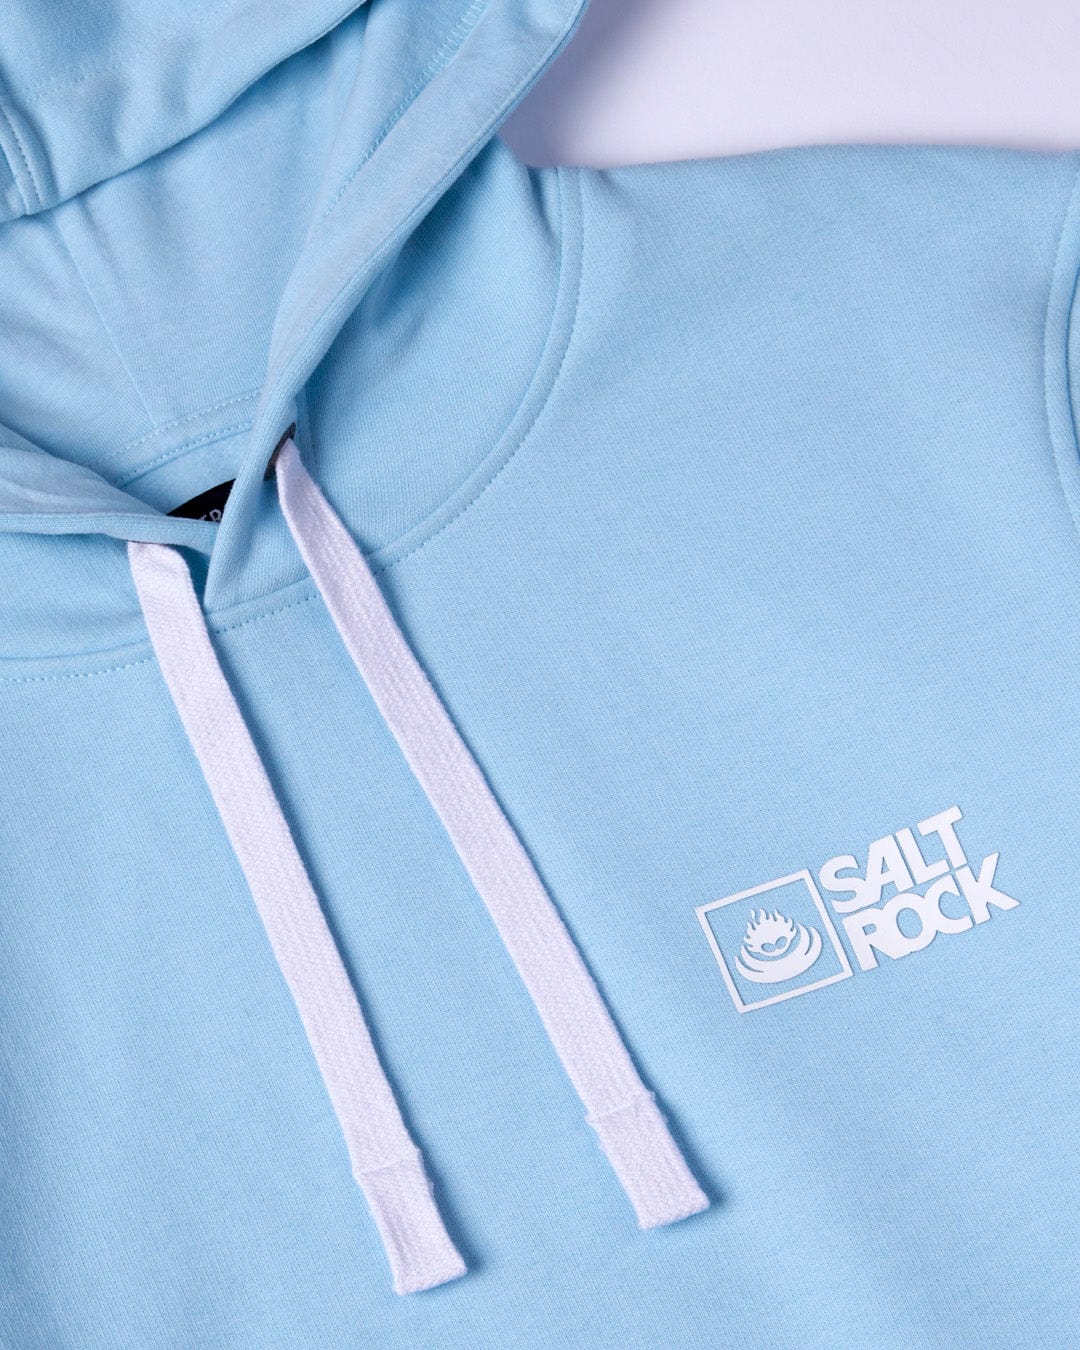 Close-up of a Saltrock Original - Mens Pop Hoodie - Light Blue with a white draw cord hood and Saltrock branding.